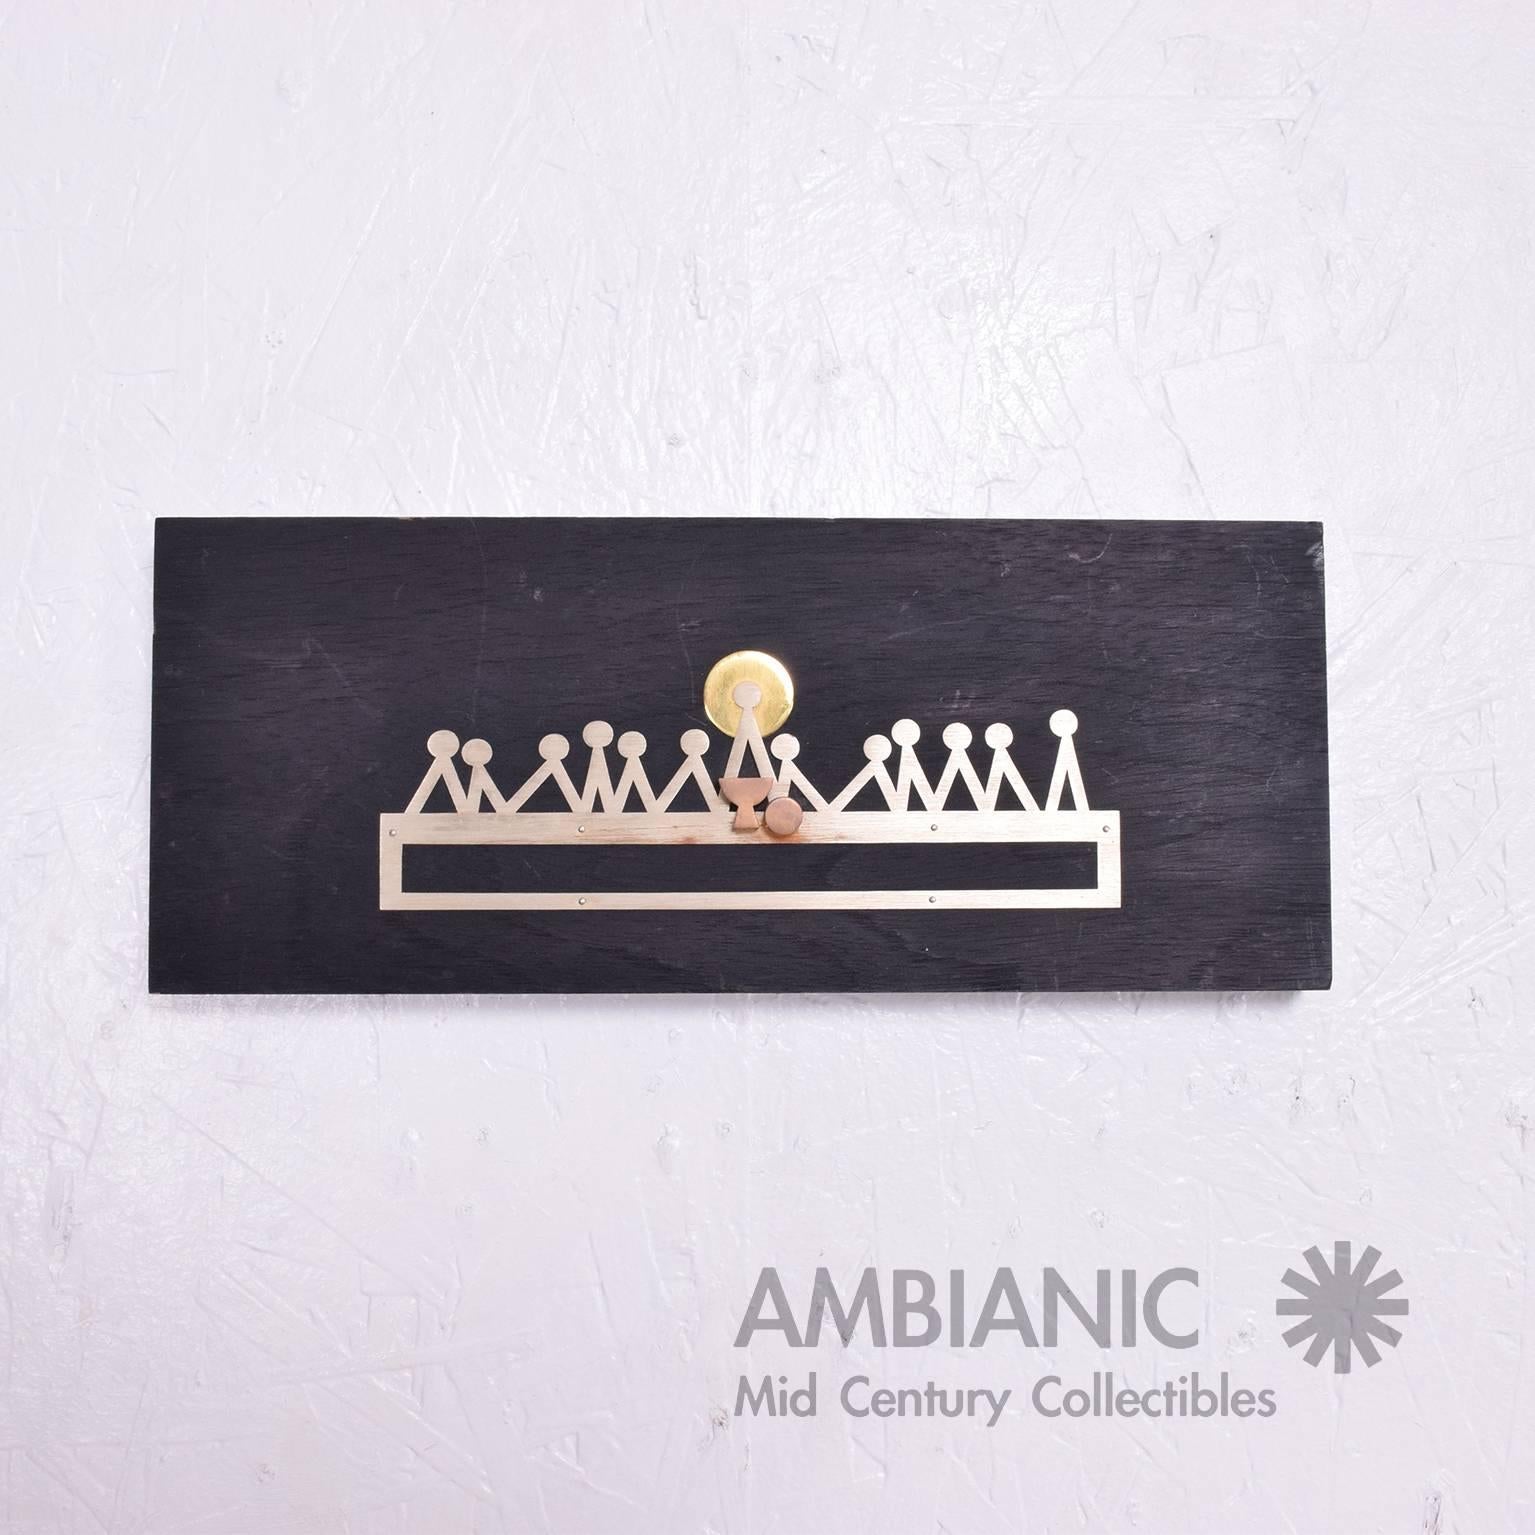 For your consideration a wall plaque made by EAMUS.

Solid mahogany wood ebonized in black paint. Modernist last supper made of silver and brass.

Measures: 4 3/4